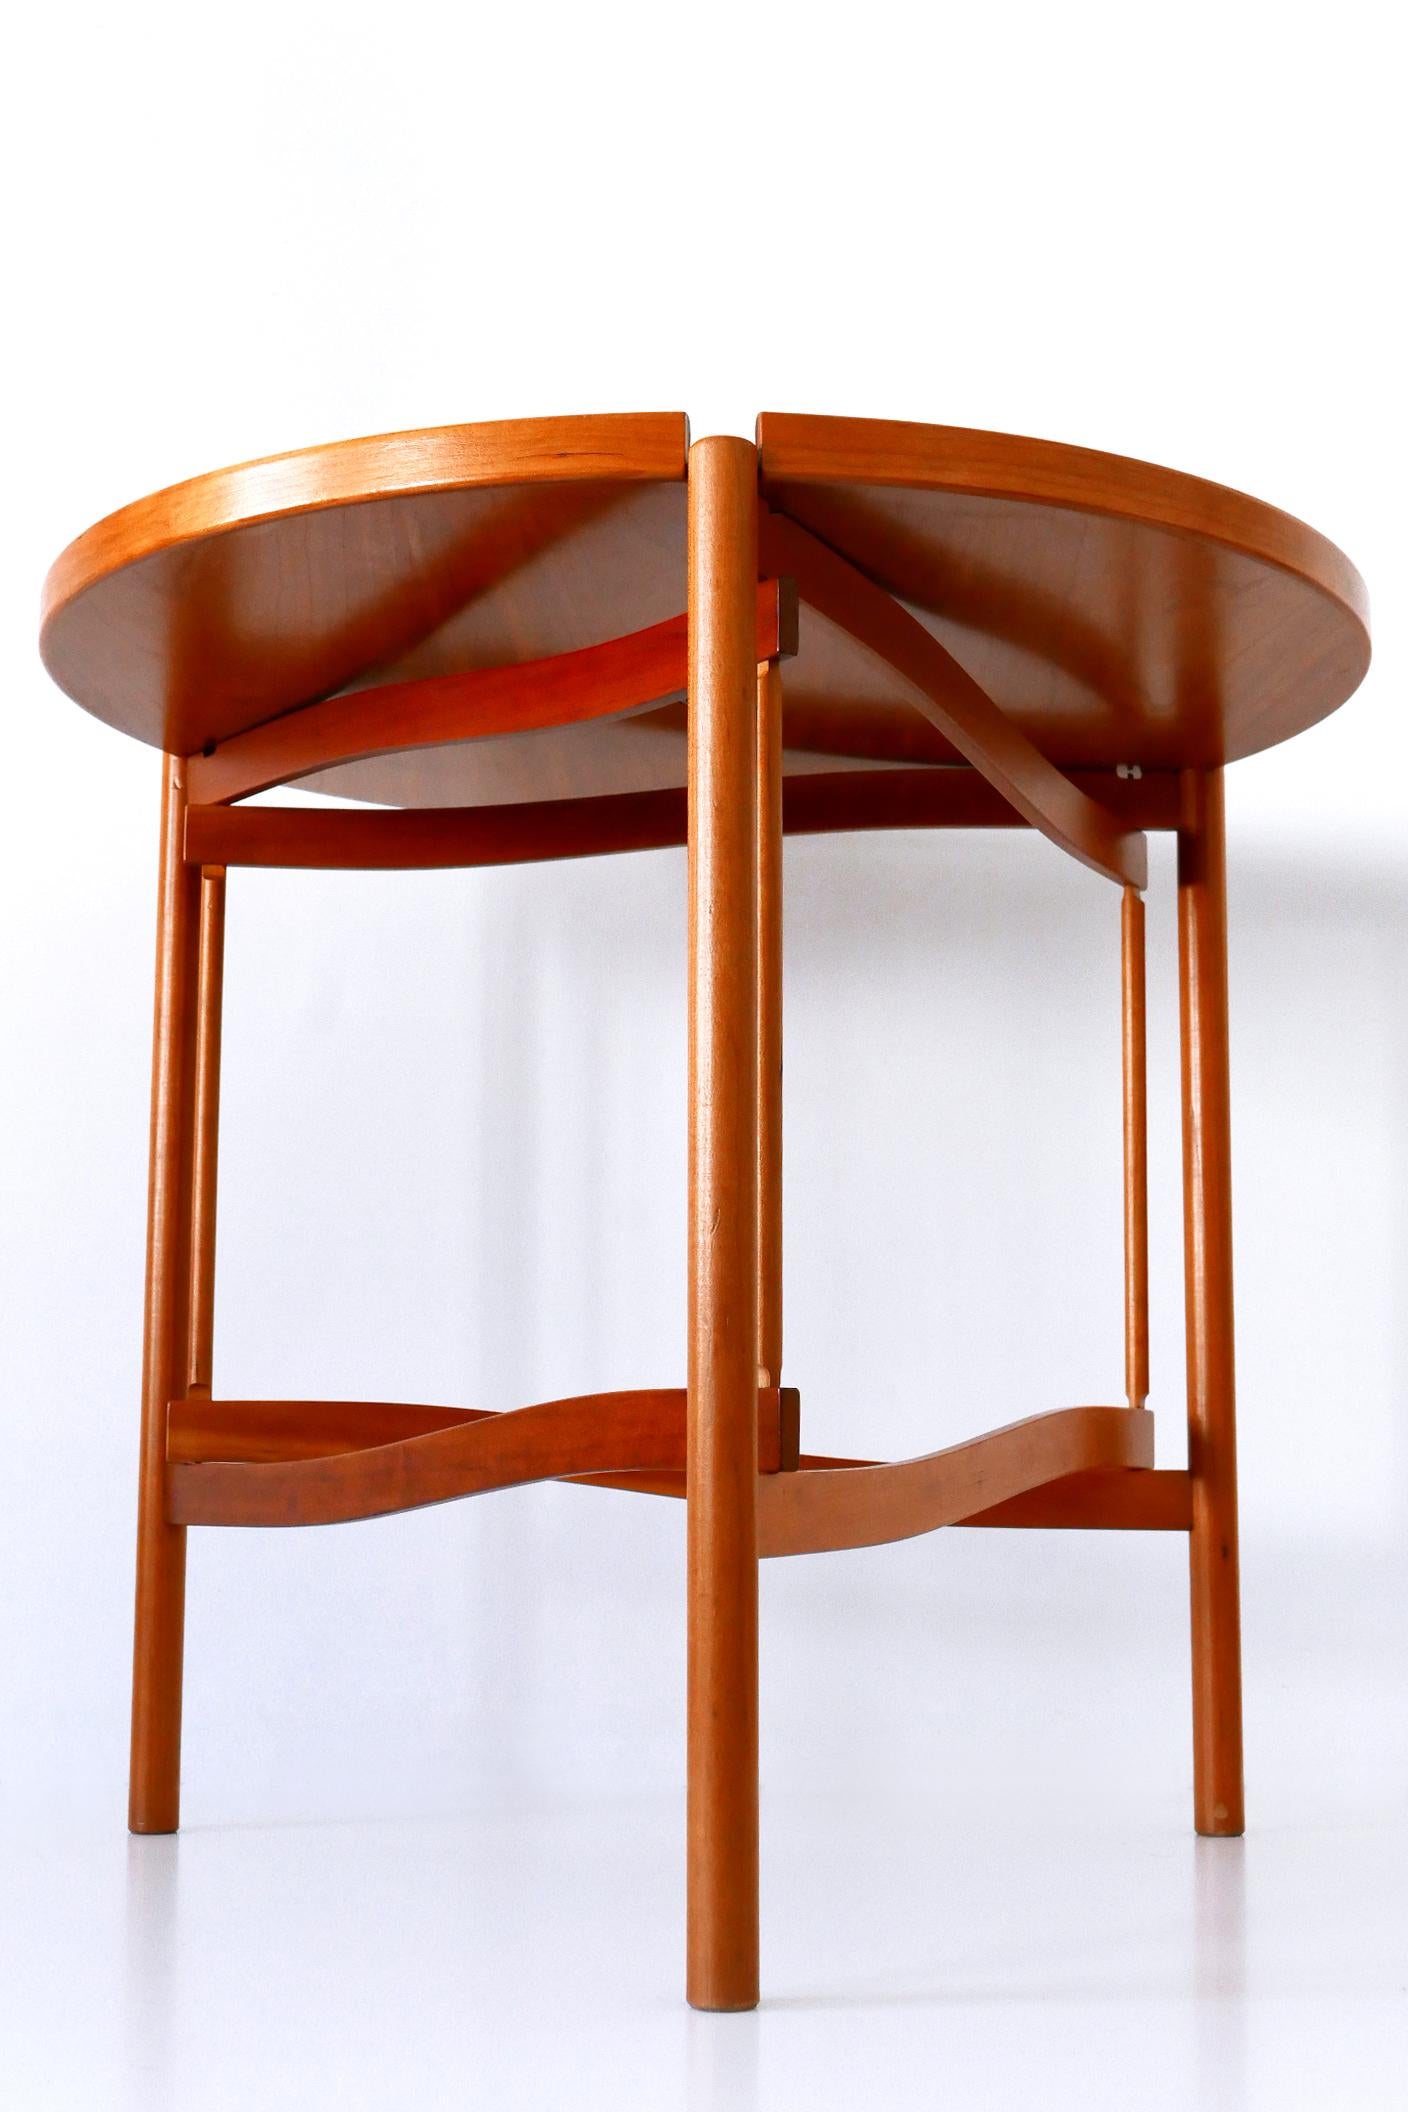 Late 20th Century Exceptional Side Table Tema by Hans Johansson for Karl Andersson & Söner Sweden For Sale